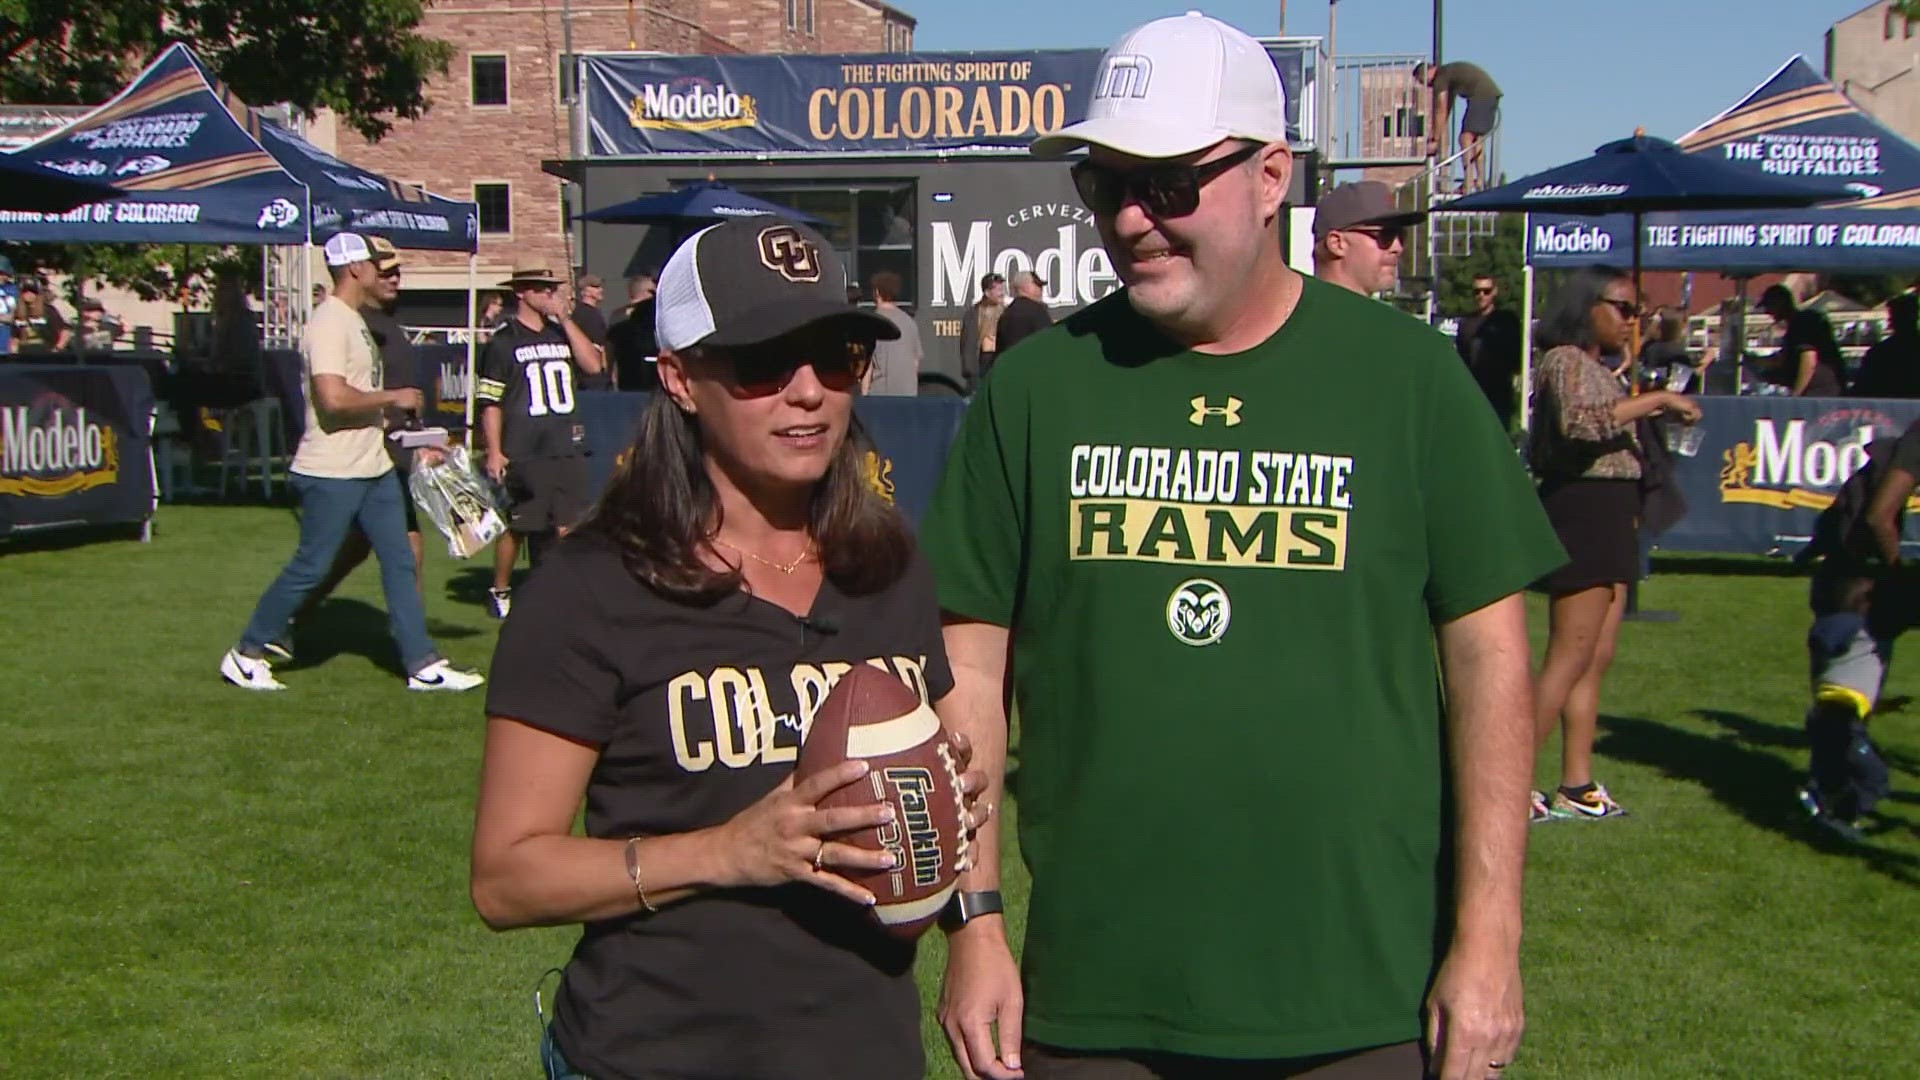 The Rocky Mountain Showdown's return -- and all the national attention for Coach Prime's Buffaloes -- had fans coming out in the thousands.